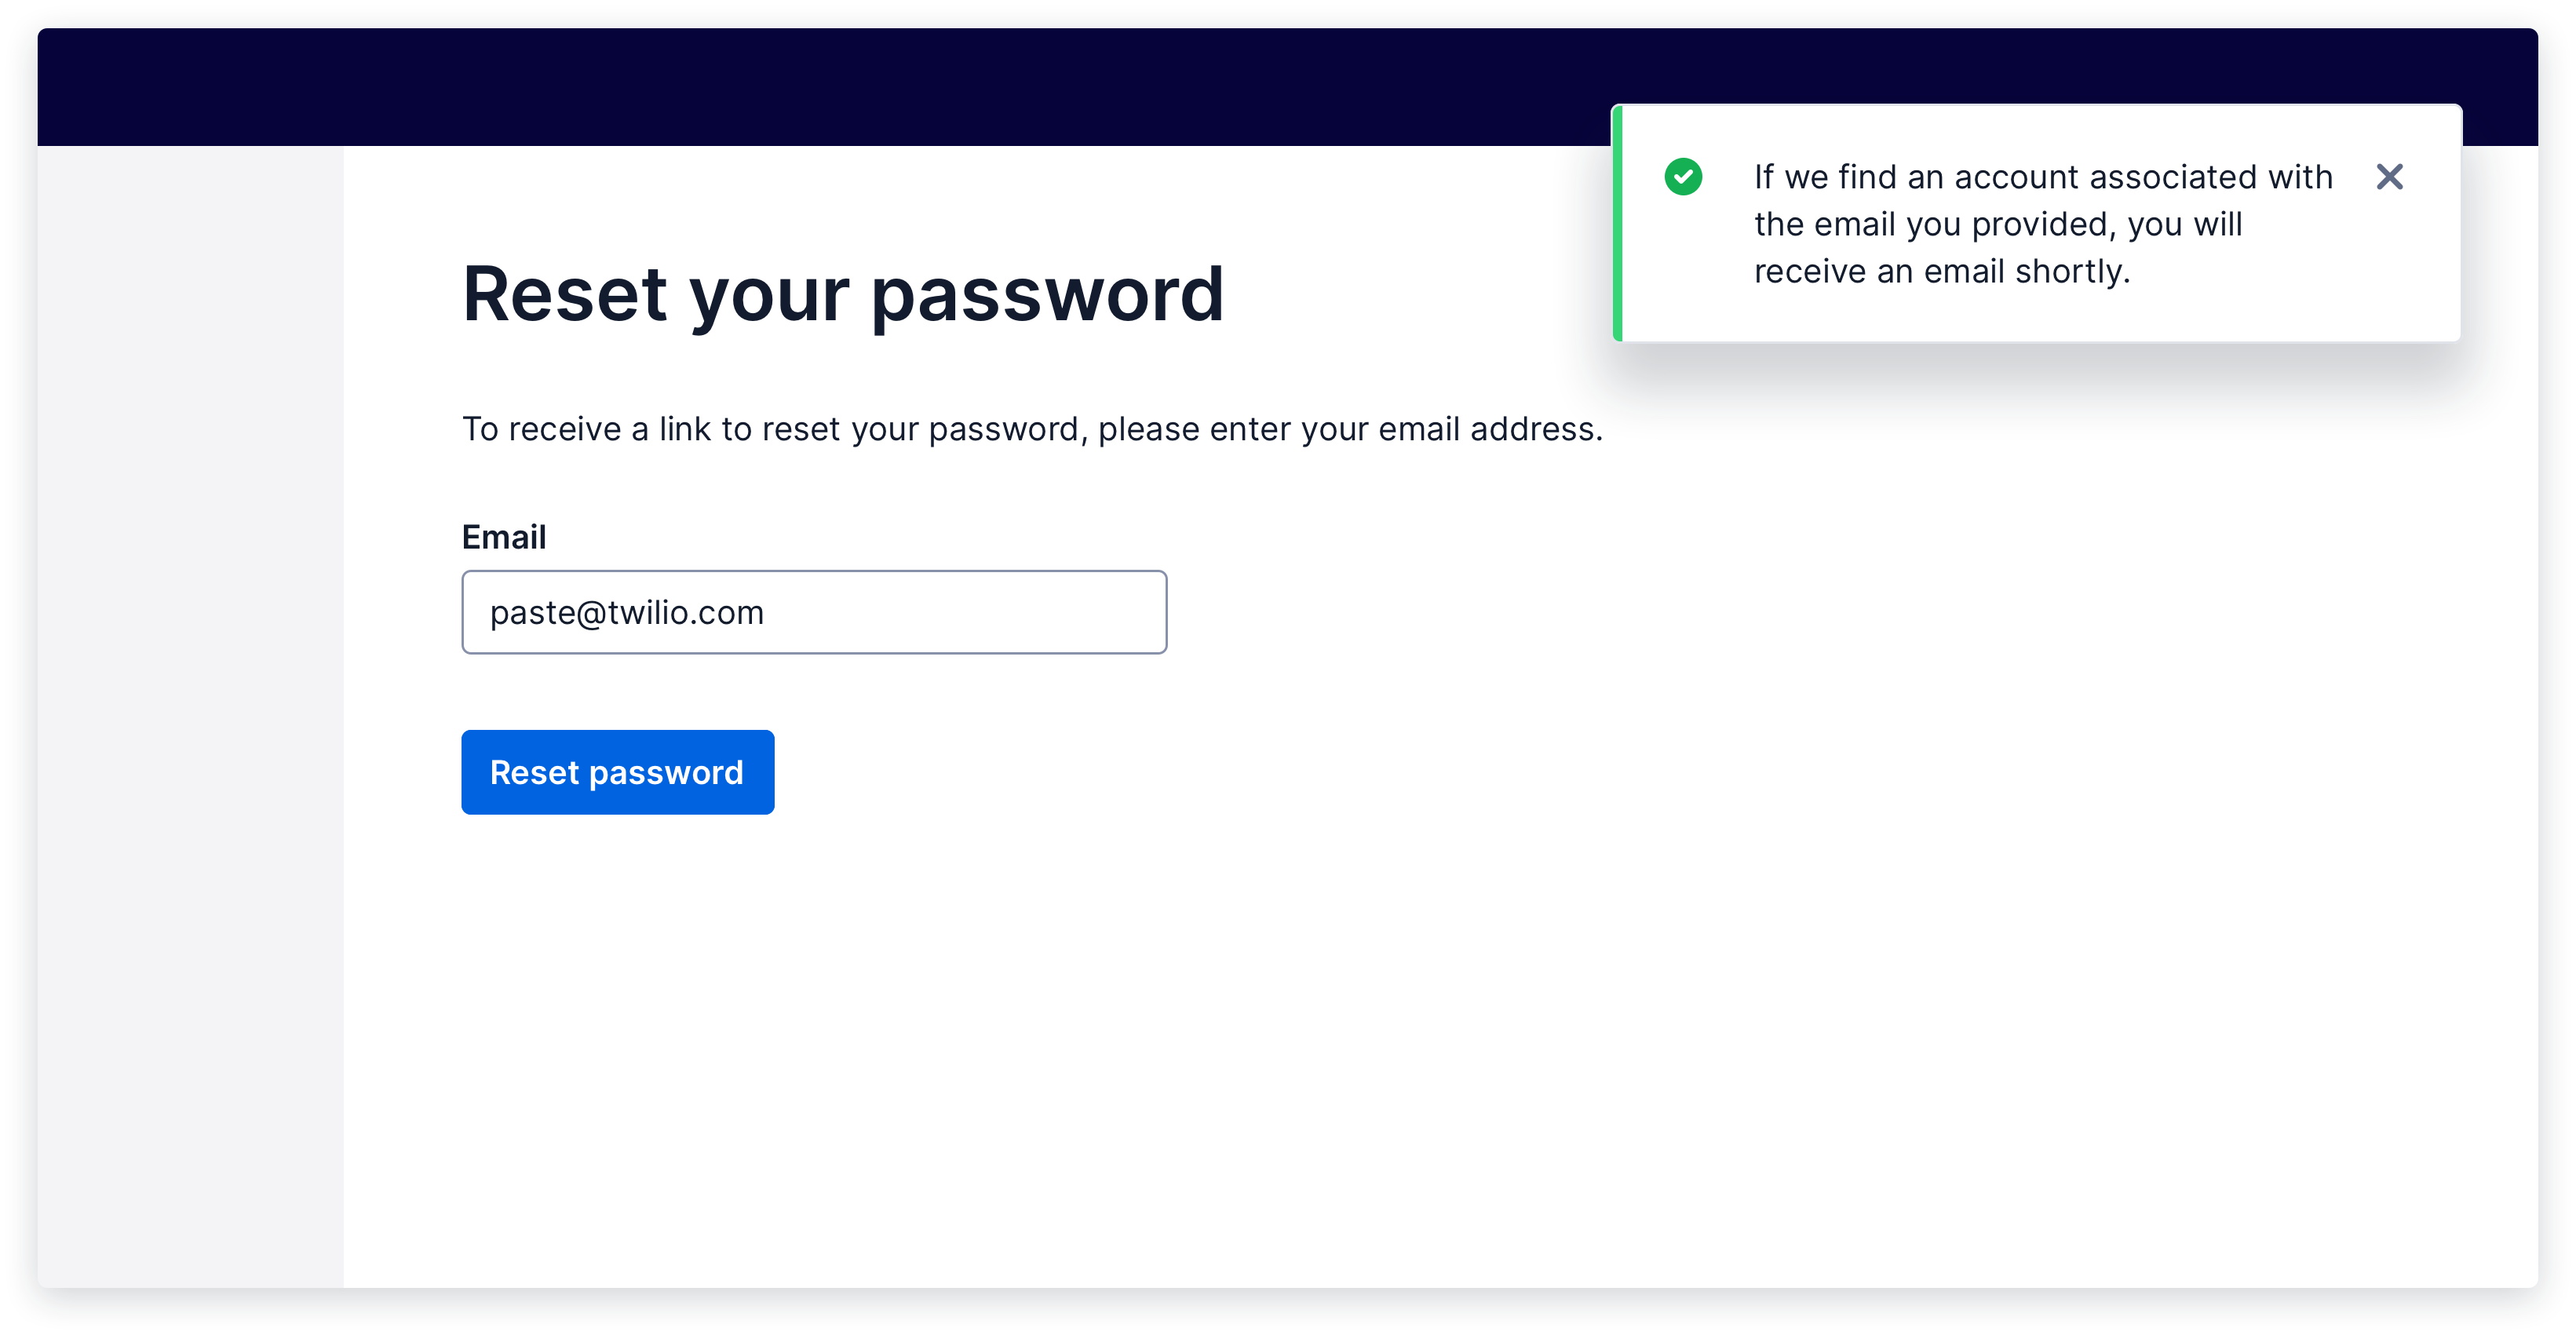 Screen with toast confirming a password reset email has been sent